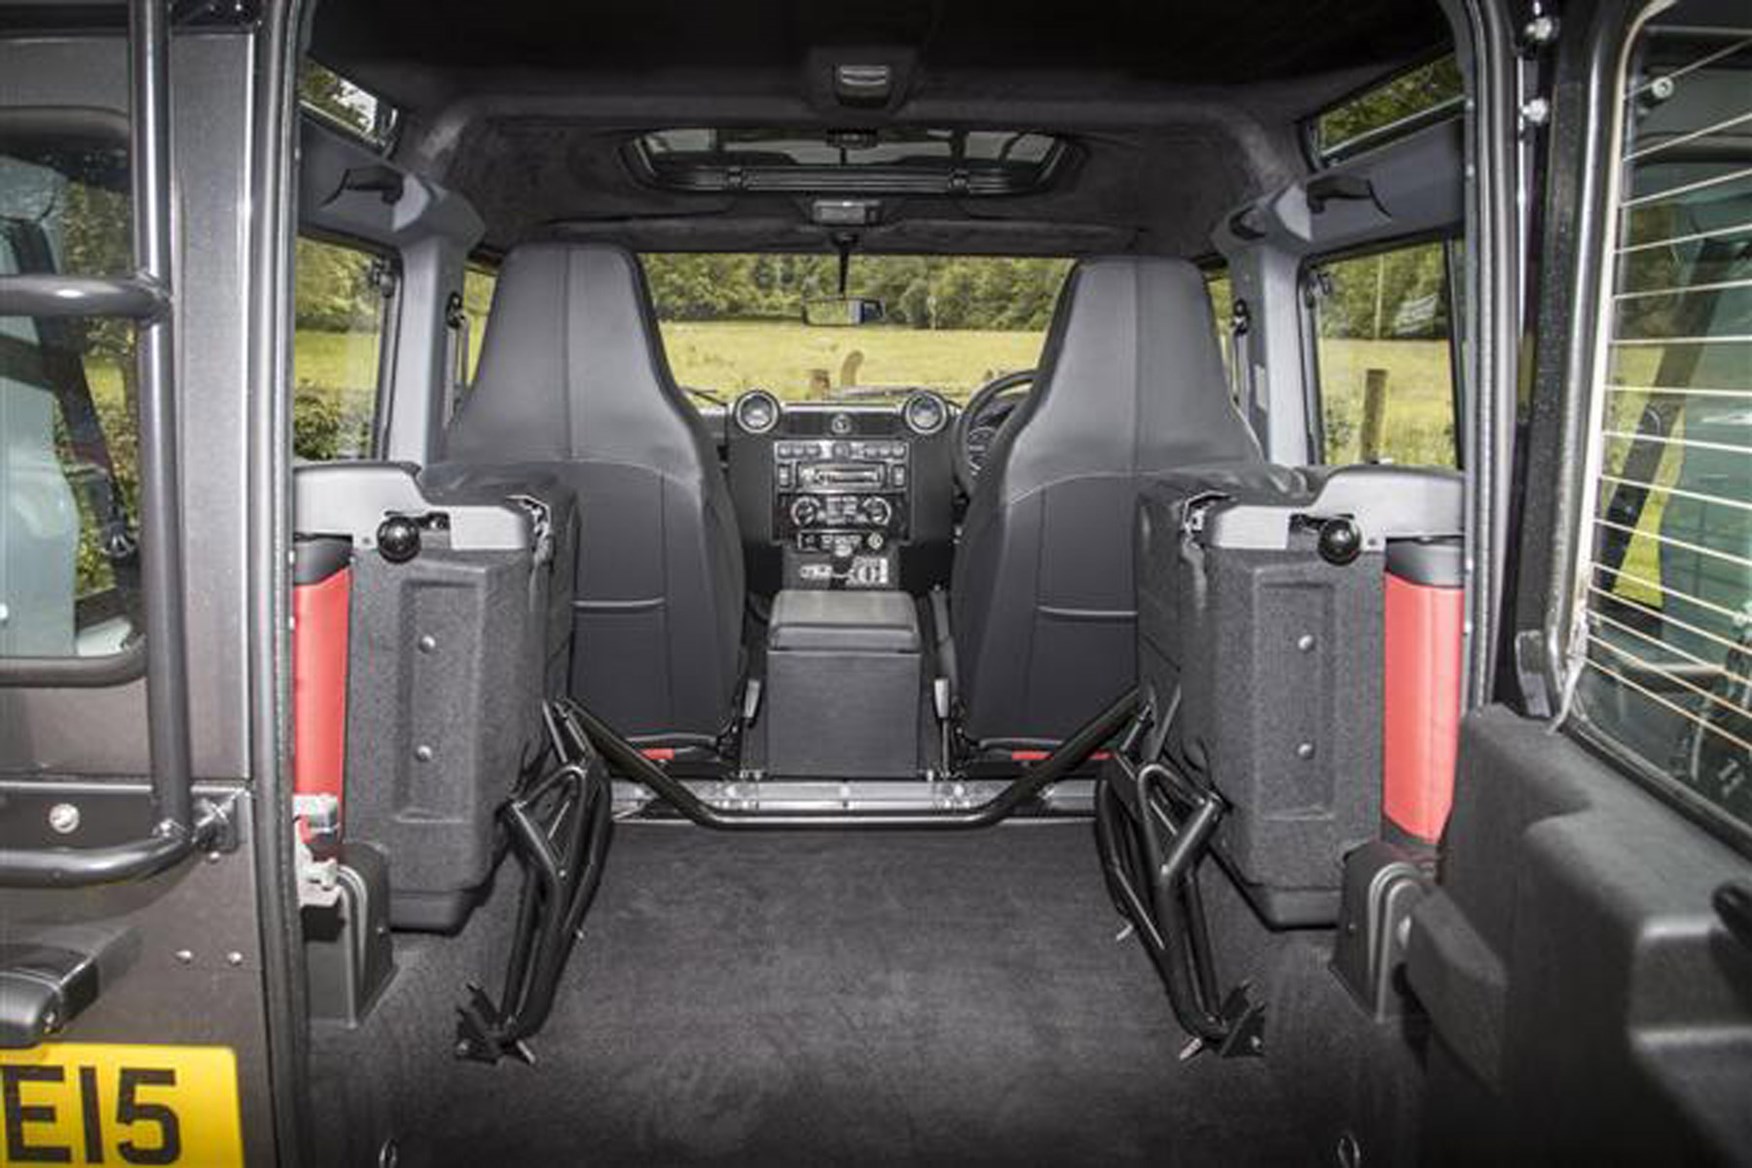 Land Rover Defender 2007-2016 review on Parkers Vans - load area dimensions